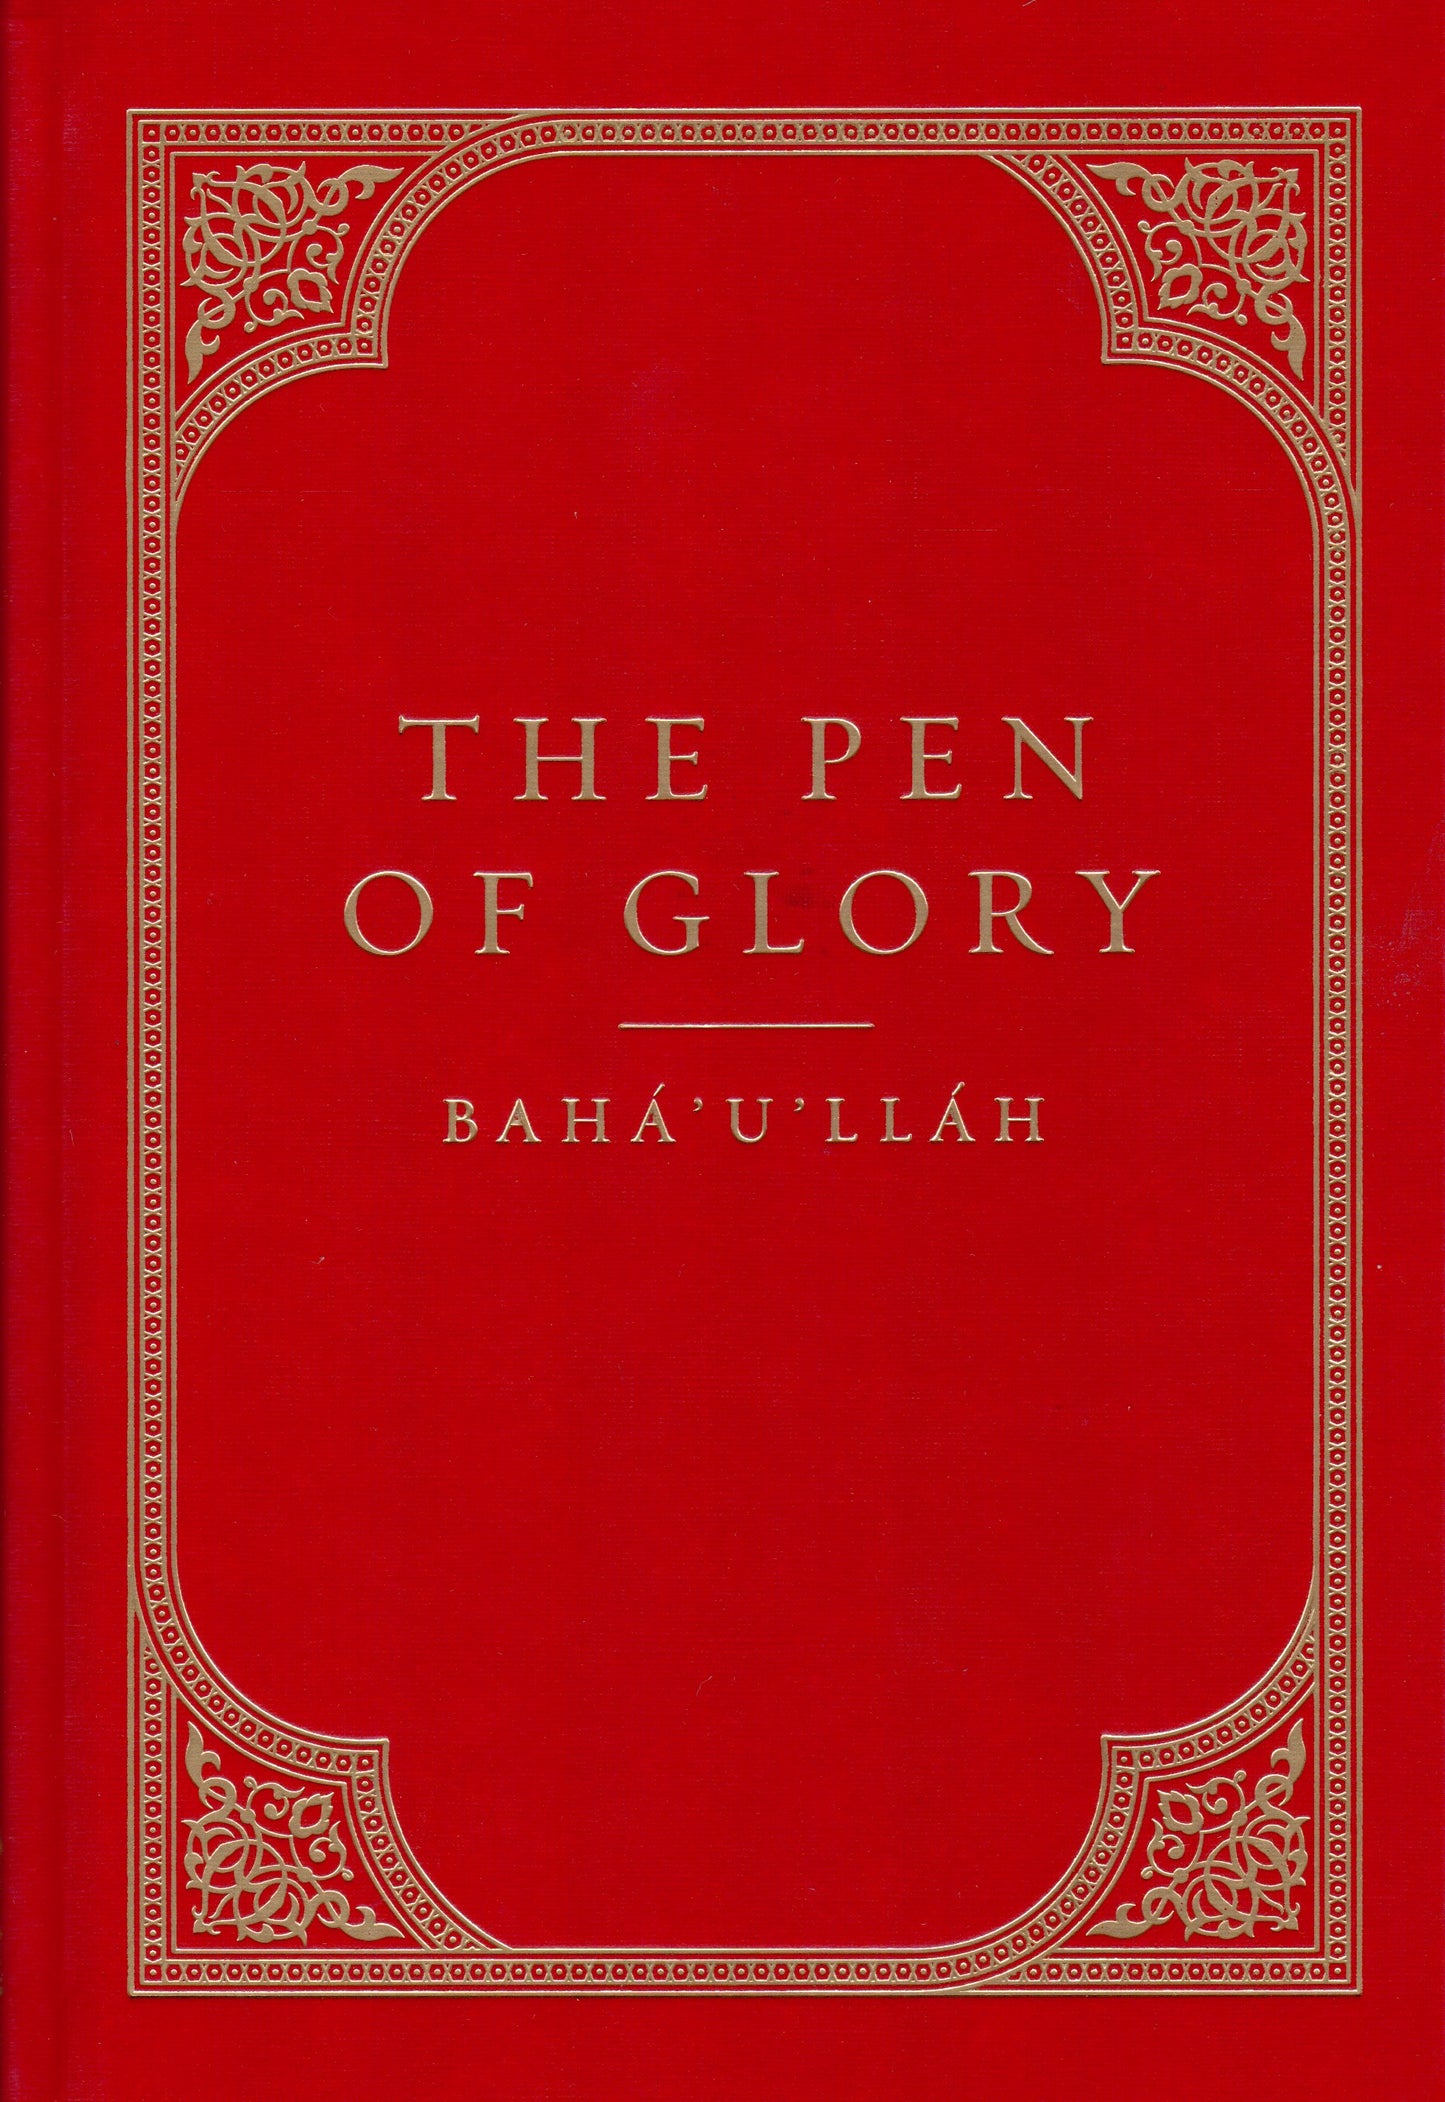 Pen of Glory, The